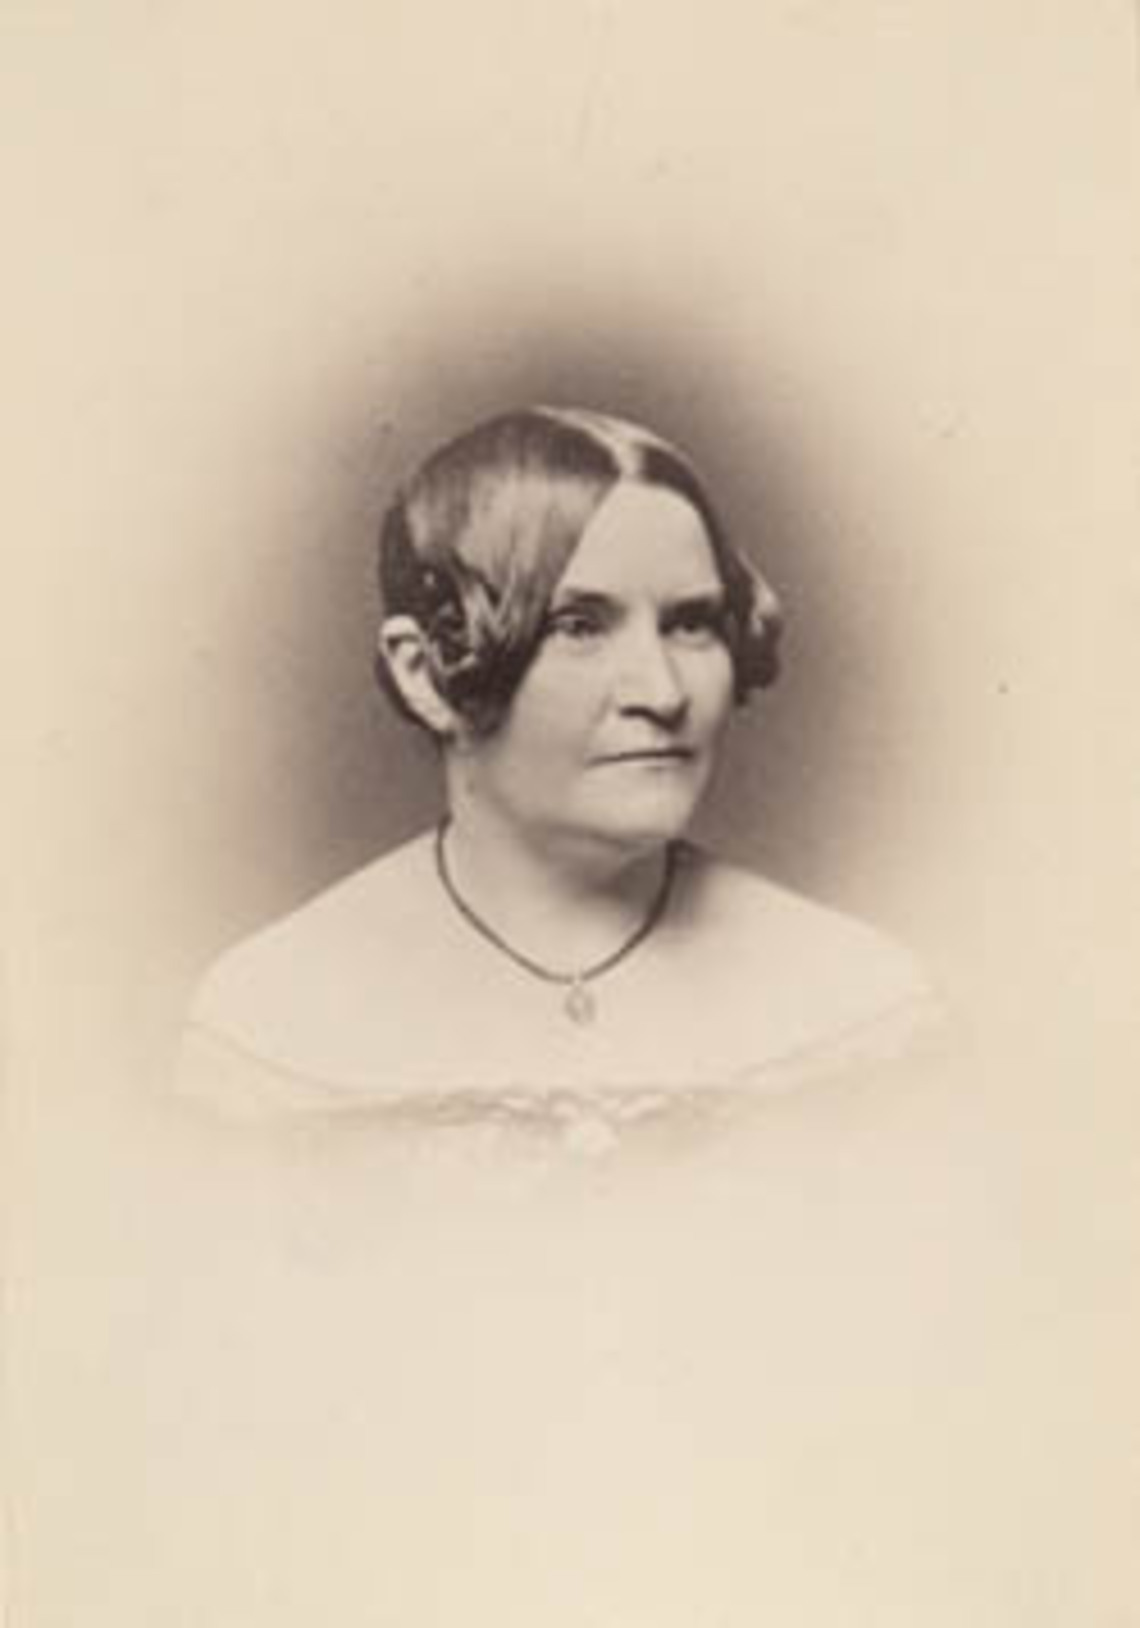 Lydia Maria Child, white woman who authored two important pamphlets in the midst of the Canterbury crisis - "An Appeal in Favor of that Class of Americans called Africans" (1833) and "The Oasis" (1834). Later in her career she became the editor of leading Abolitionist newspapers and helped Harriet Jacobs to get her writings into print.